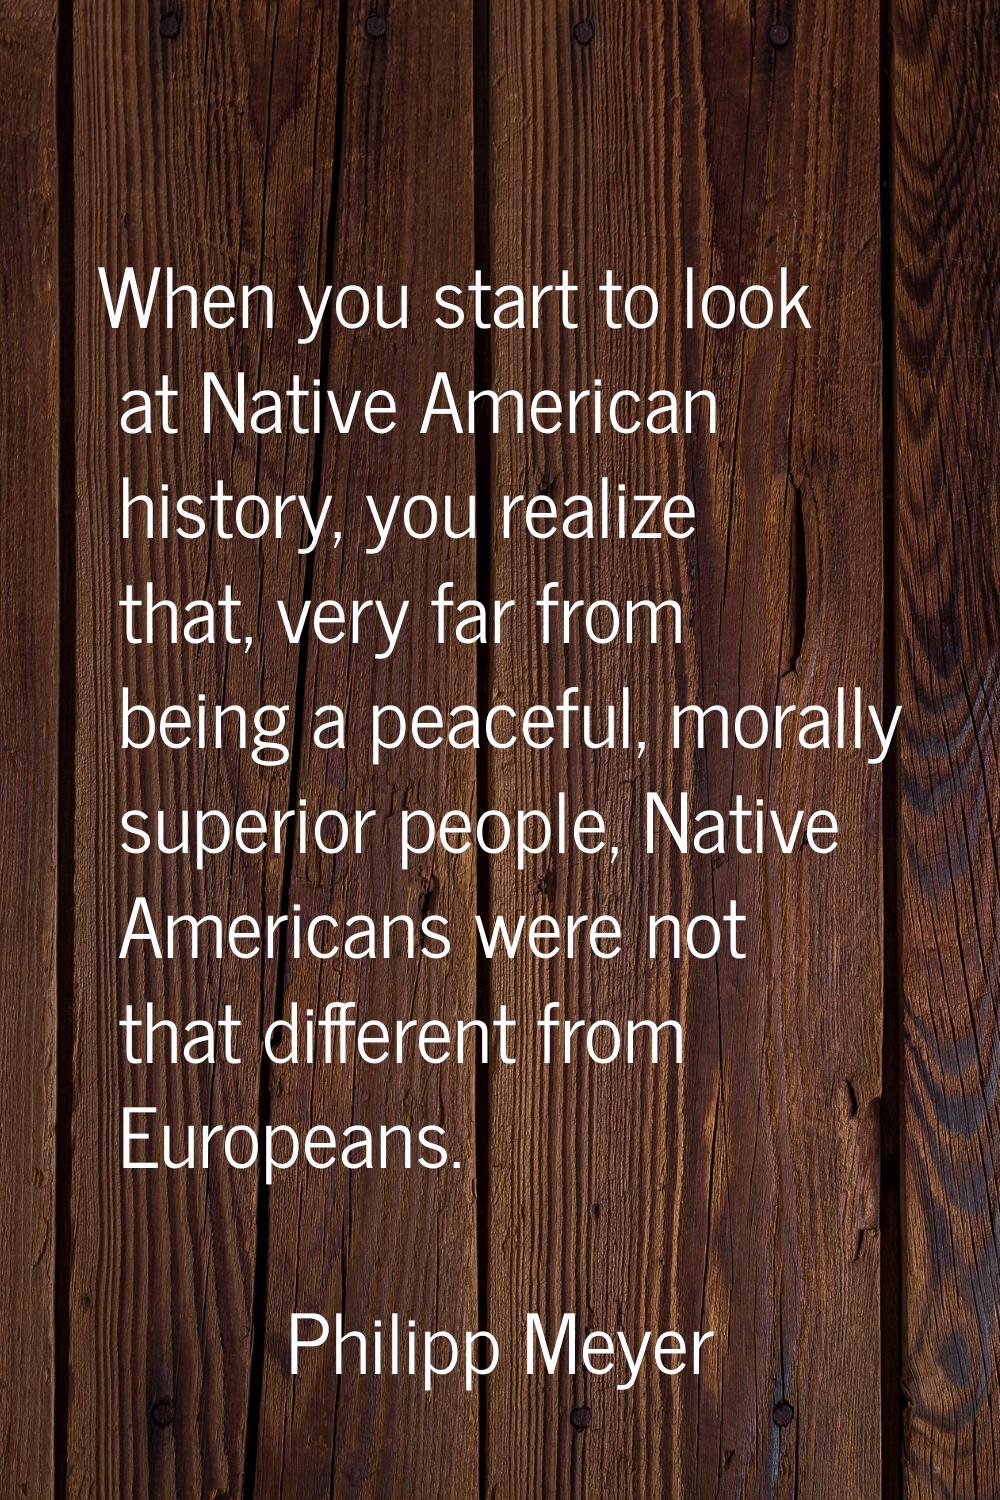 When you start to look at Native American history, you realize that, very far from being a peaceful